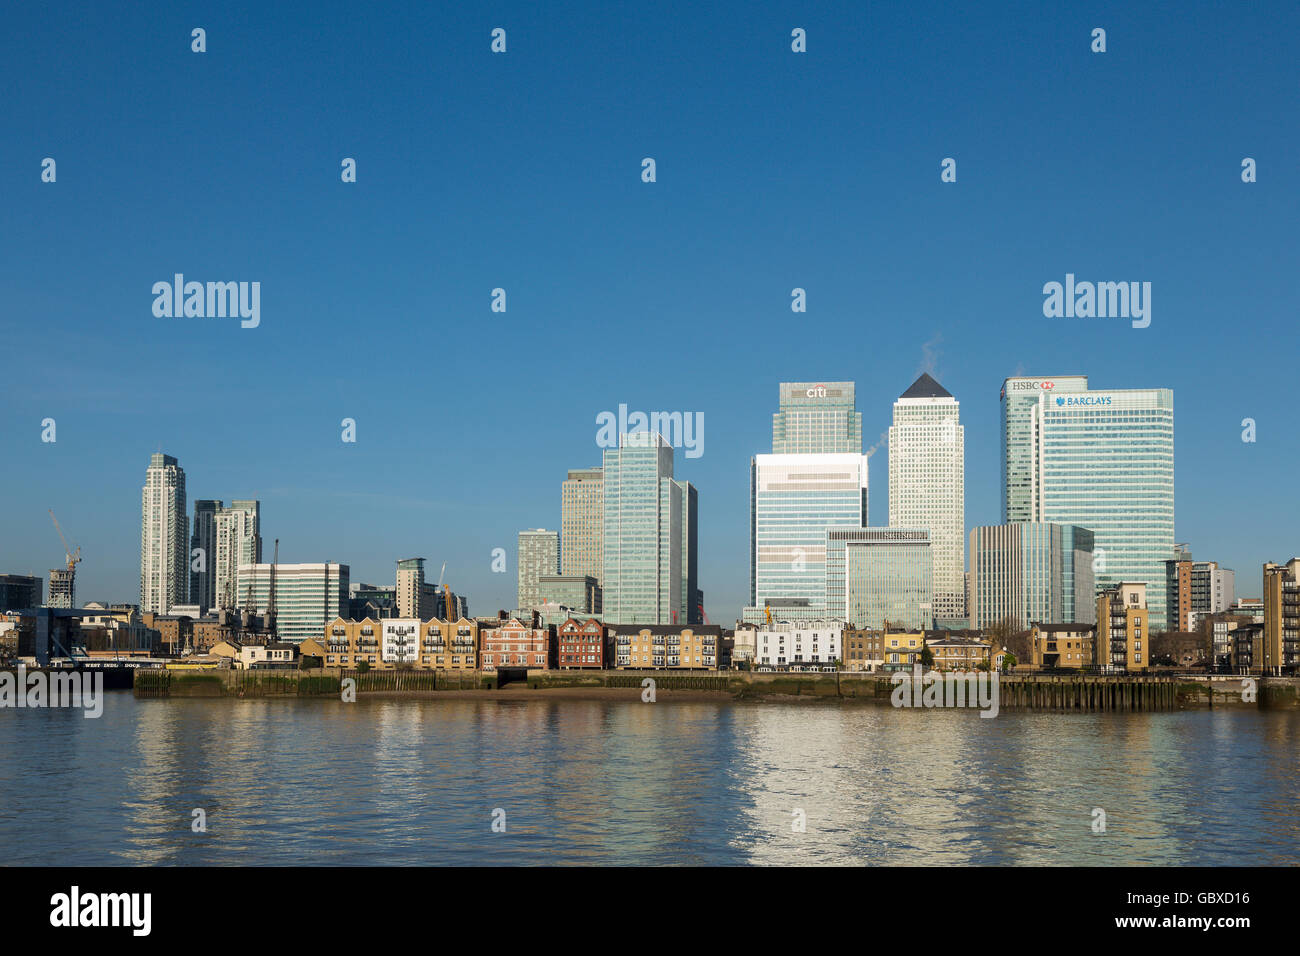 Canary Wharf skyline business district, banche, Londra, Inghilterra Foto Stock